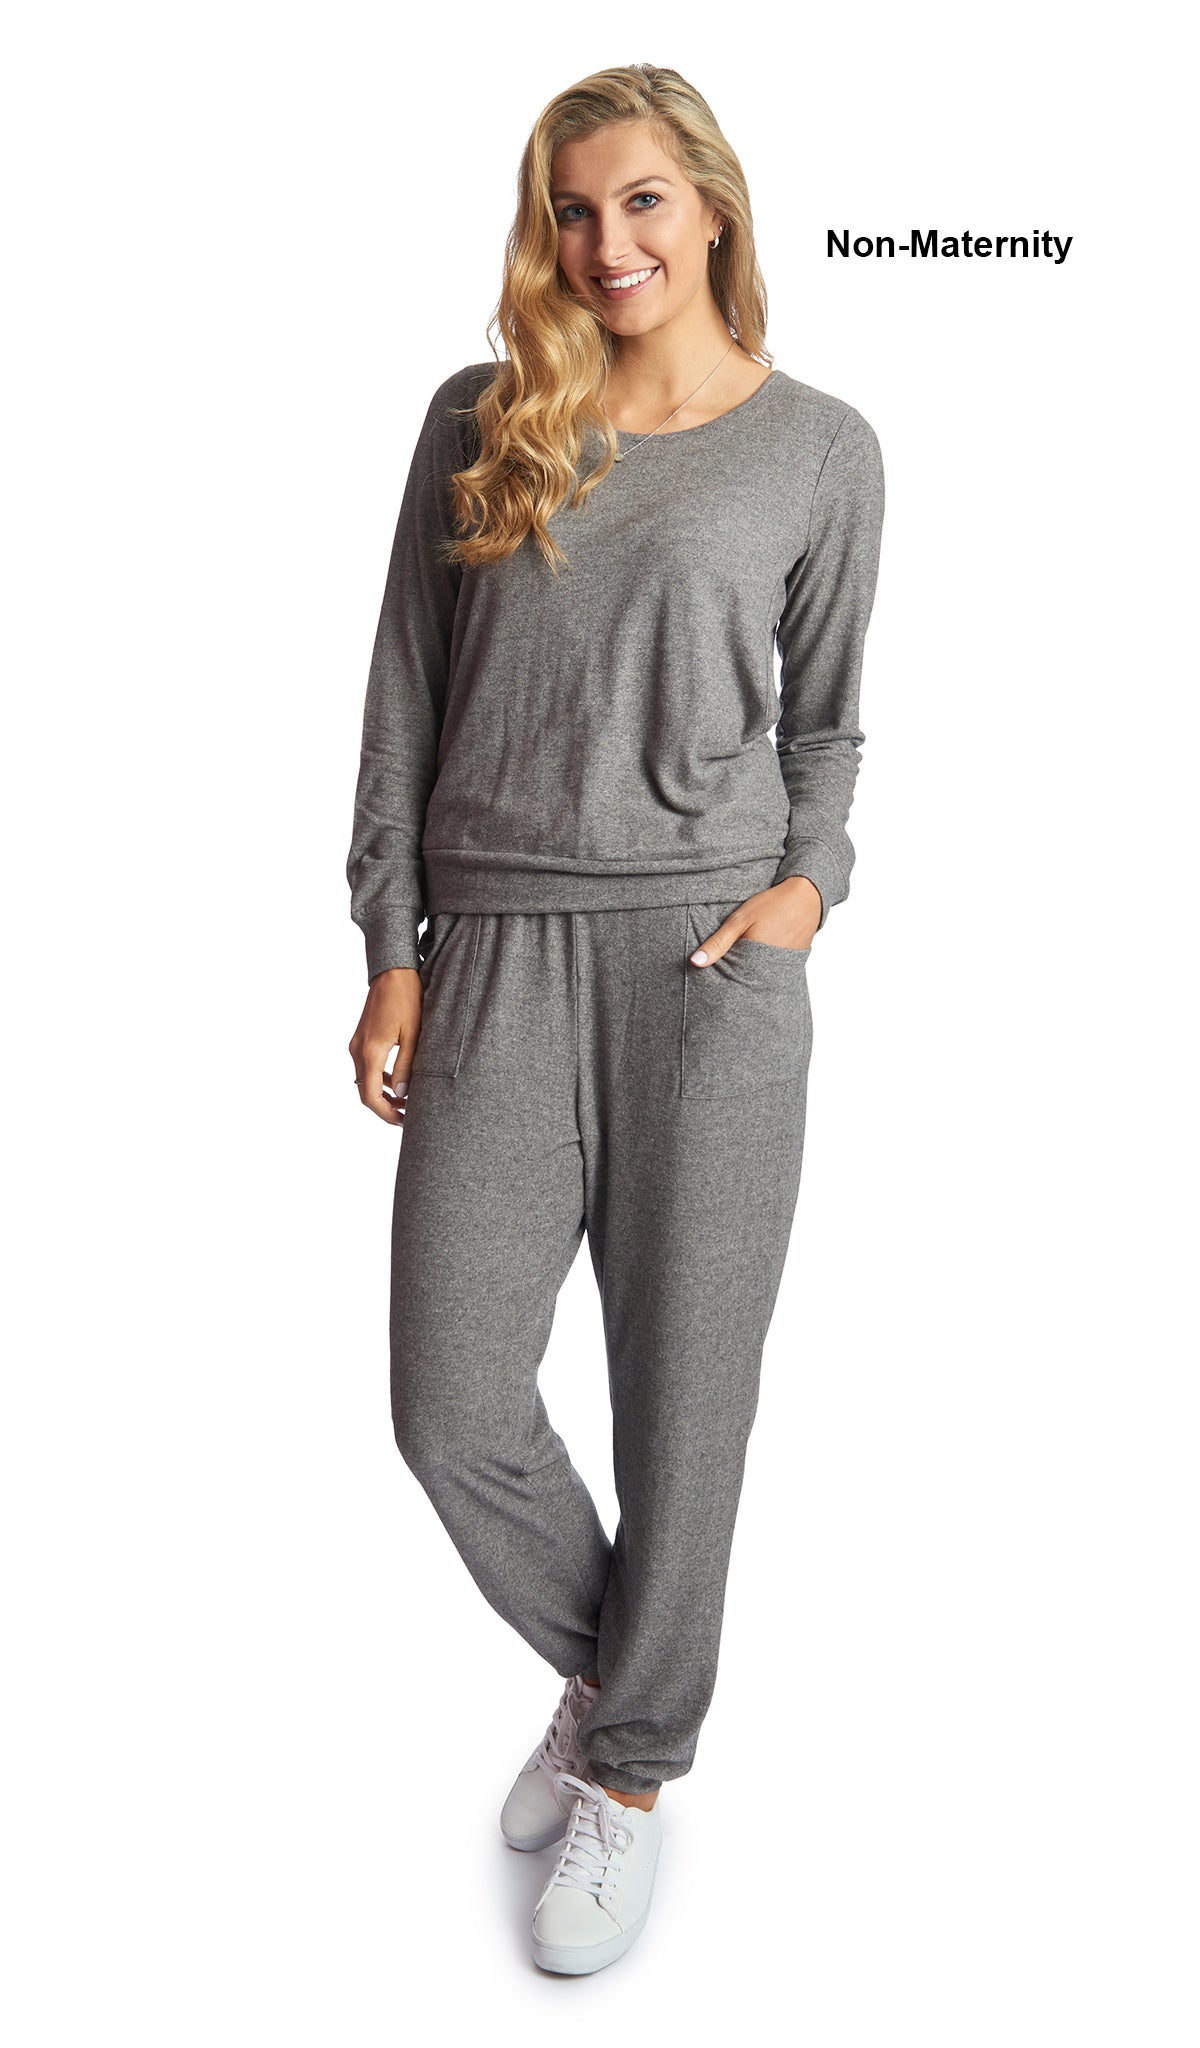 Charcoal Whitney 2-Piece on woman wearing as non-maternity. Long sleeve top with nursing access on sides and long pant with cuff.